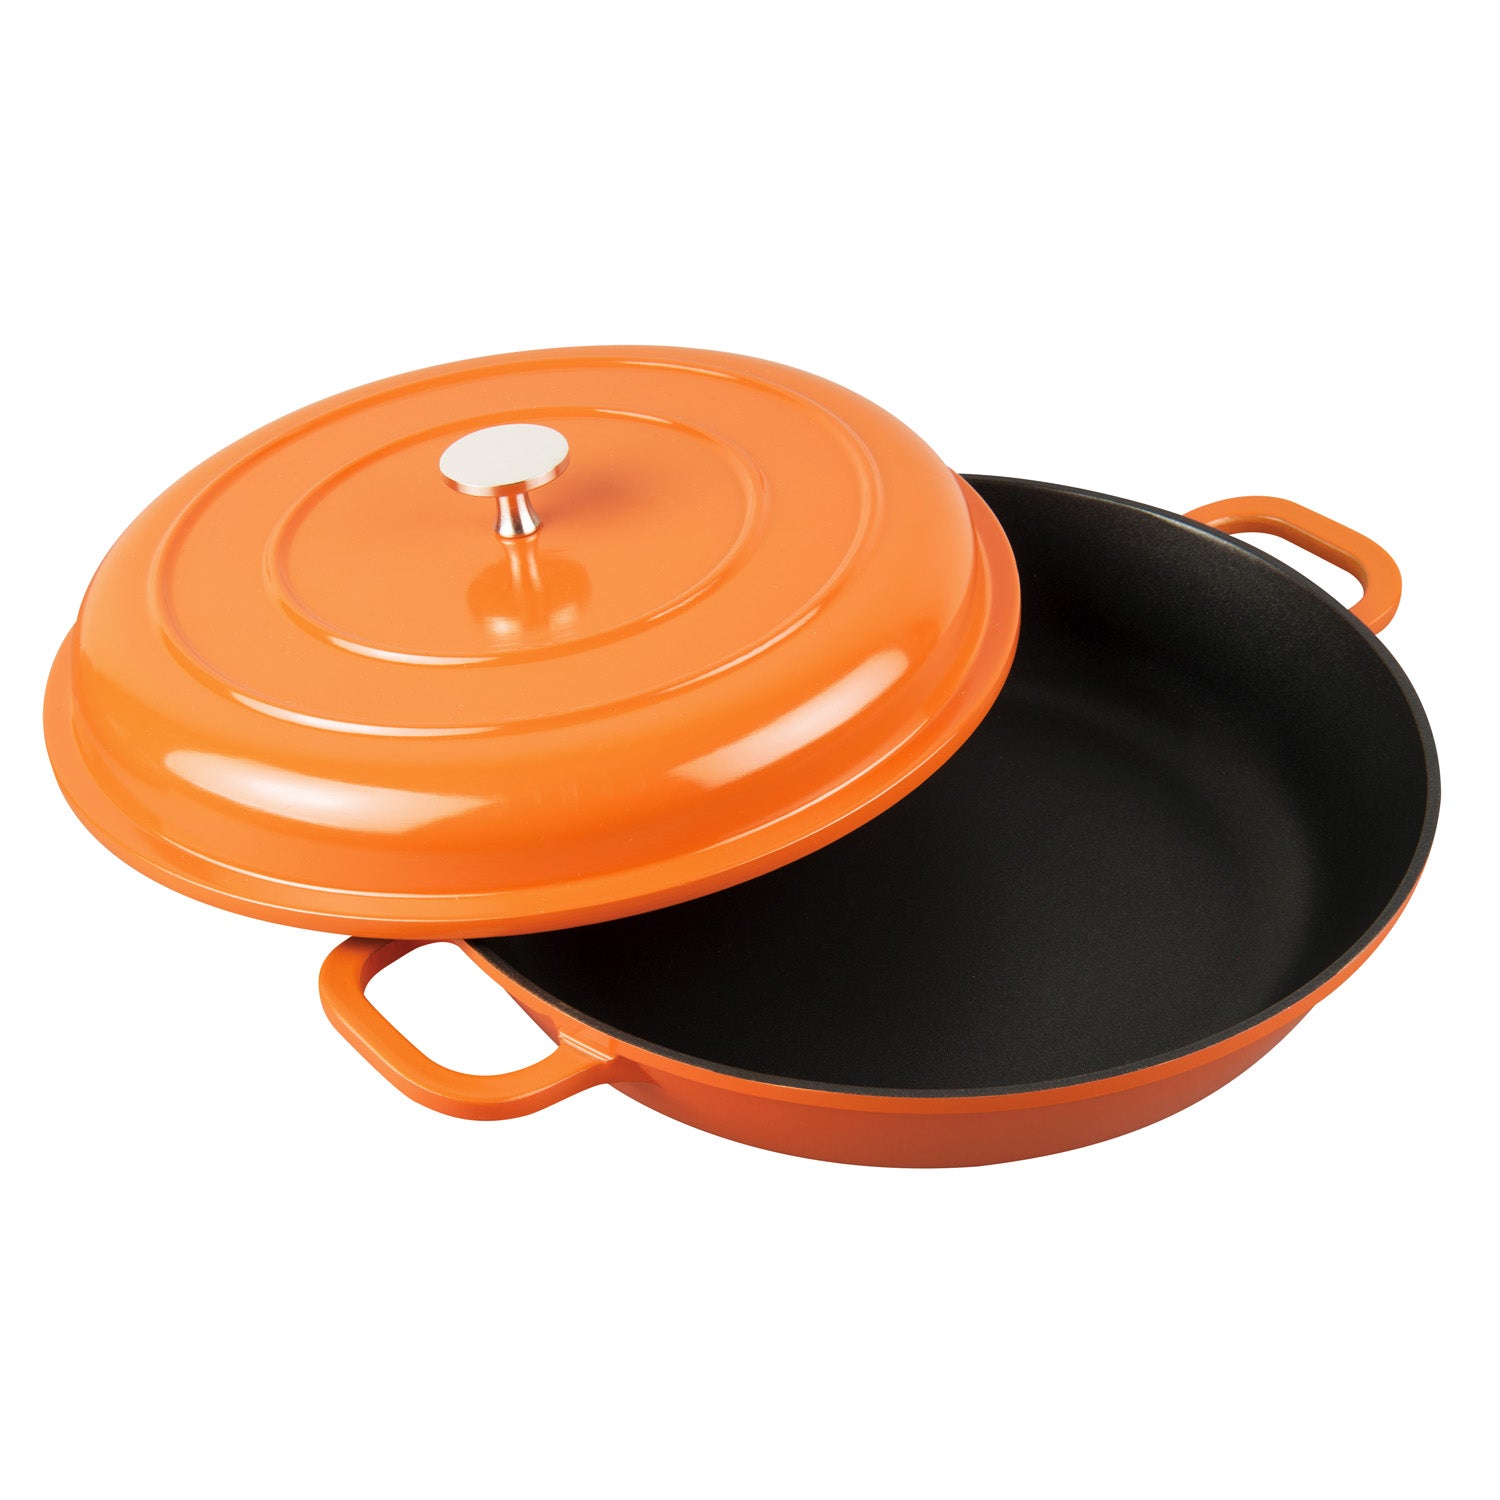 Commercial Chef 3 Quart Dutch Oven w Skillet Lid in the Cooking